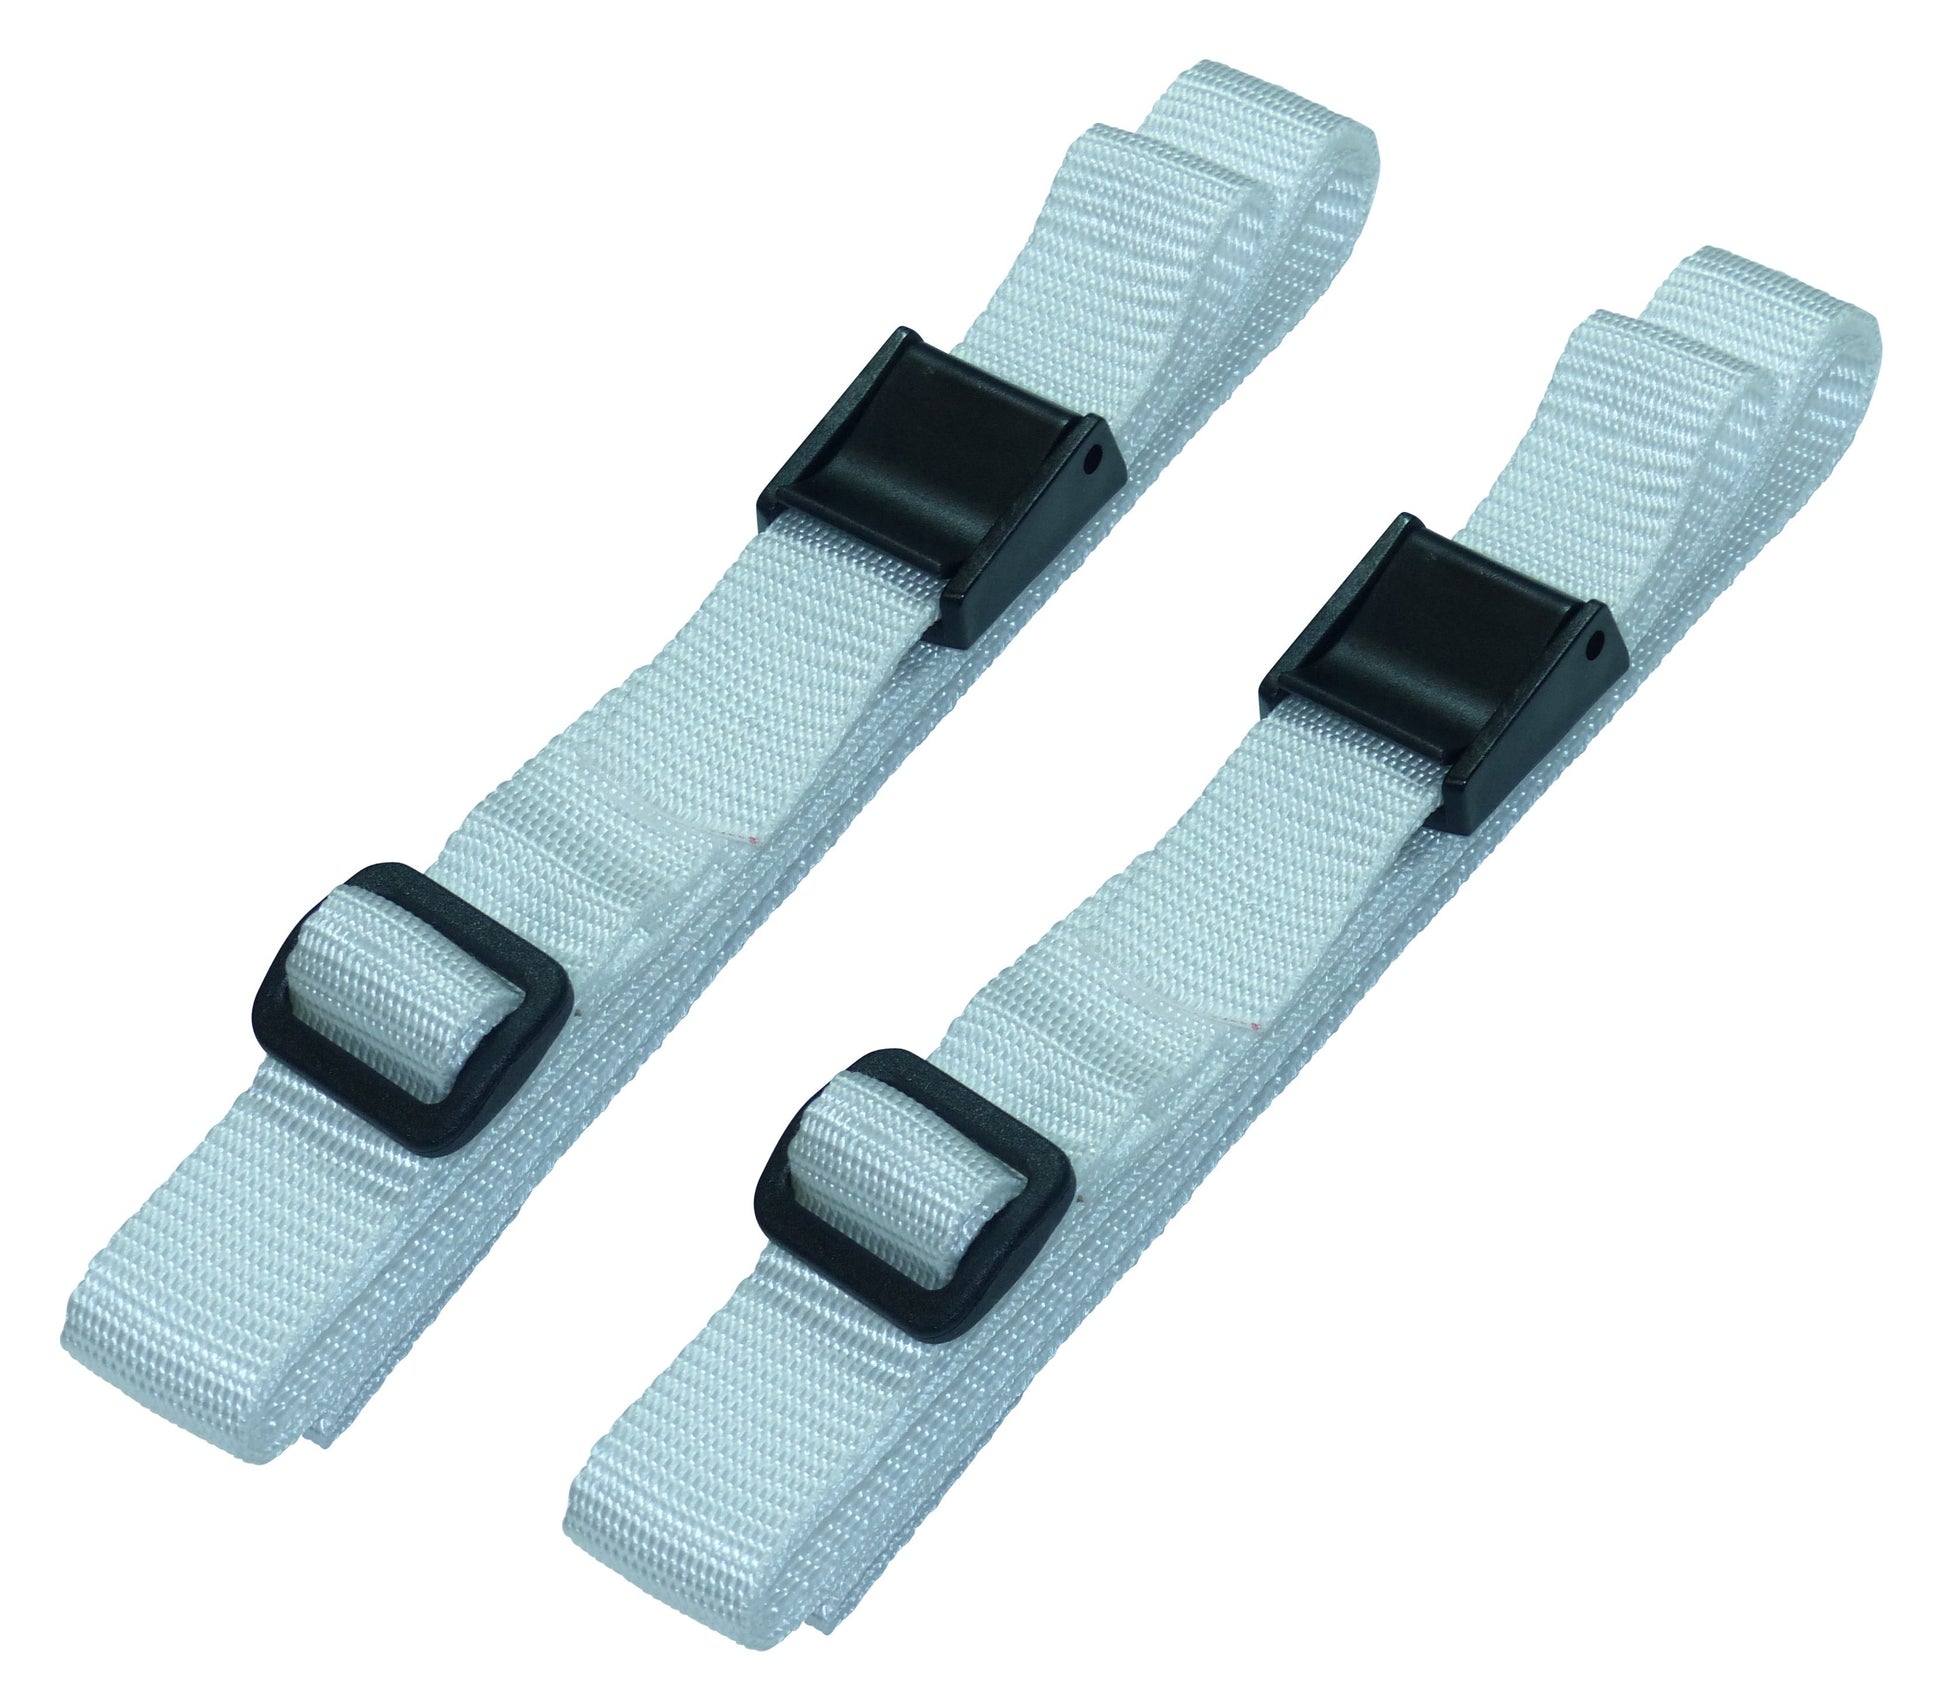 25mm Rivetted Strap with Plastic Cam Buckle & Triglide Buckles (Pair) in white